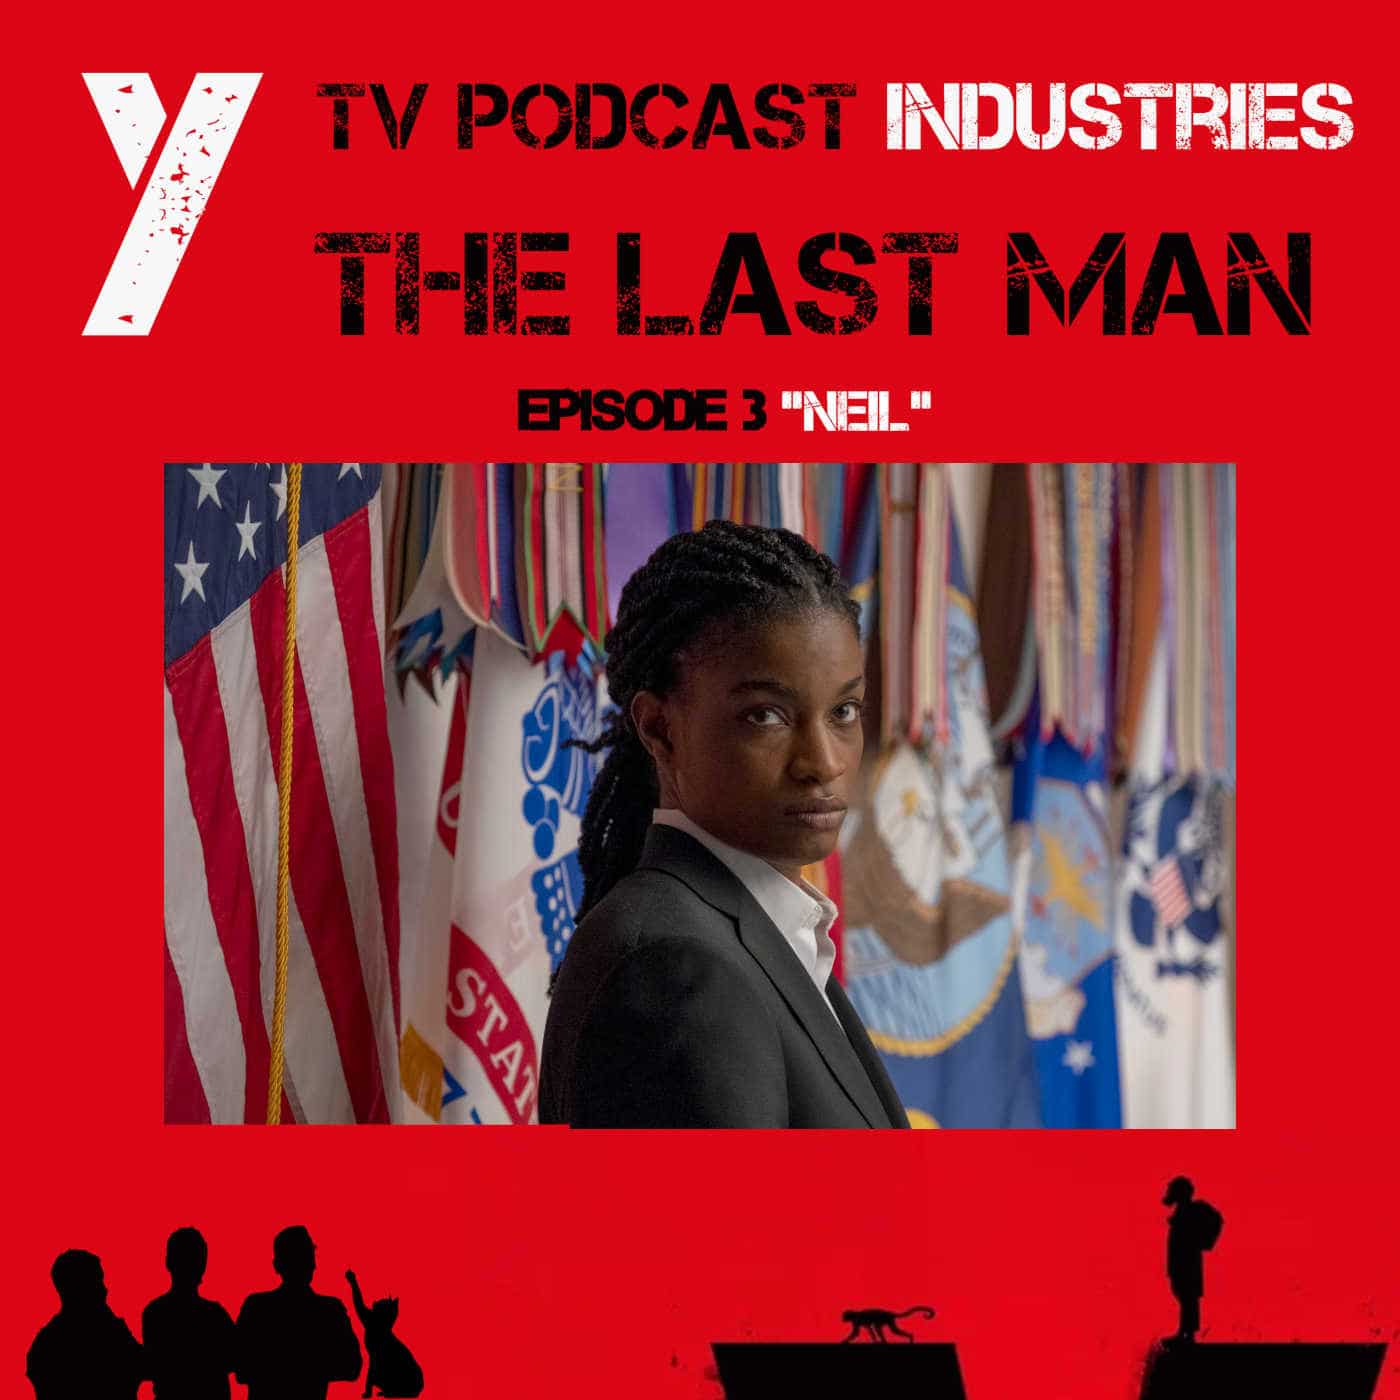 Y The Last Man Episode 3 "Neil" Podcast on TV Podcast Industries